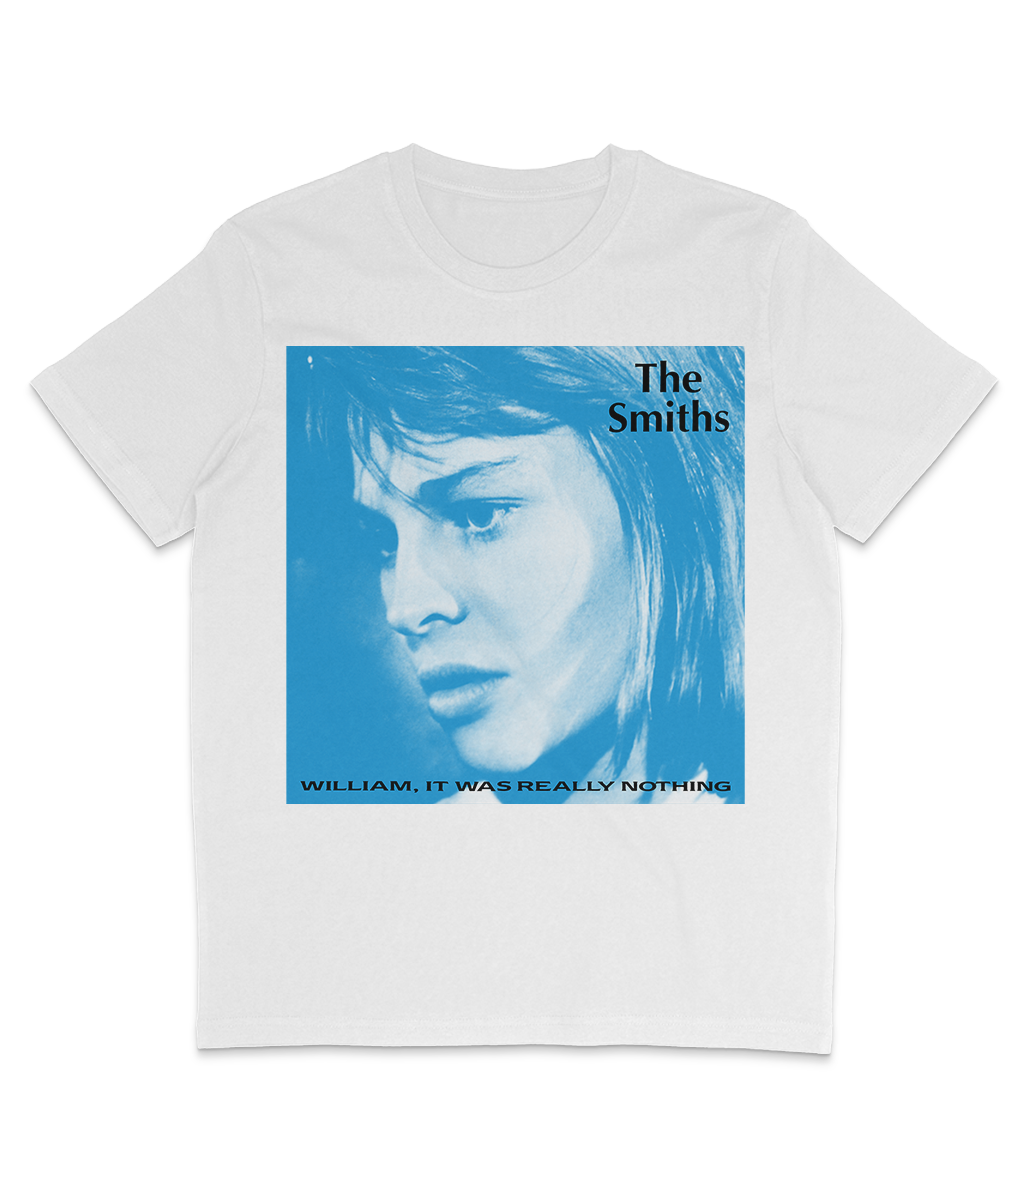 The Smiths - William, It Was Really Nothing - Julie Christie - Blue